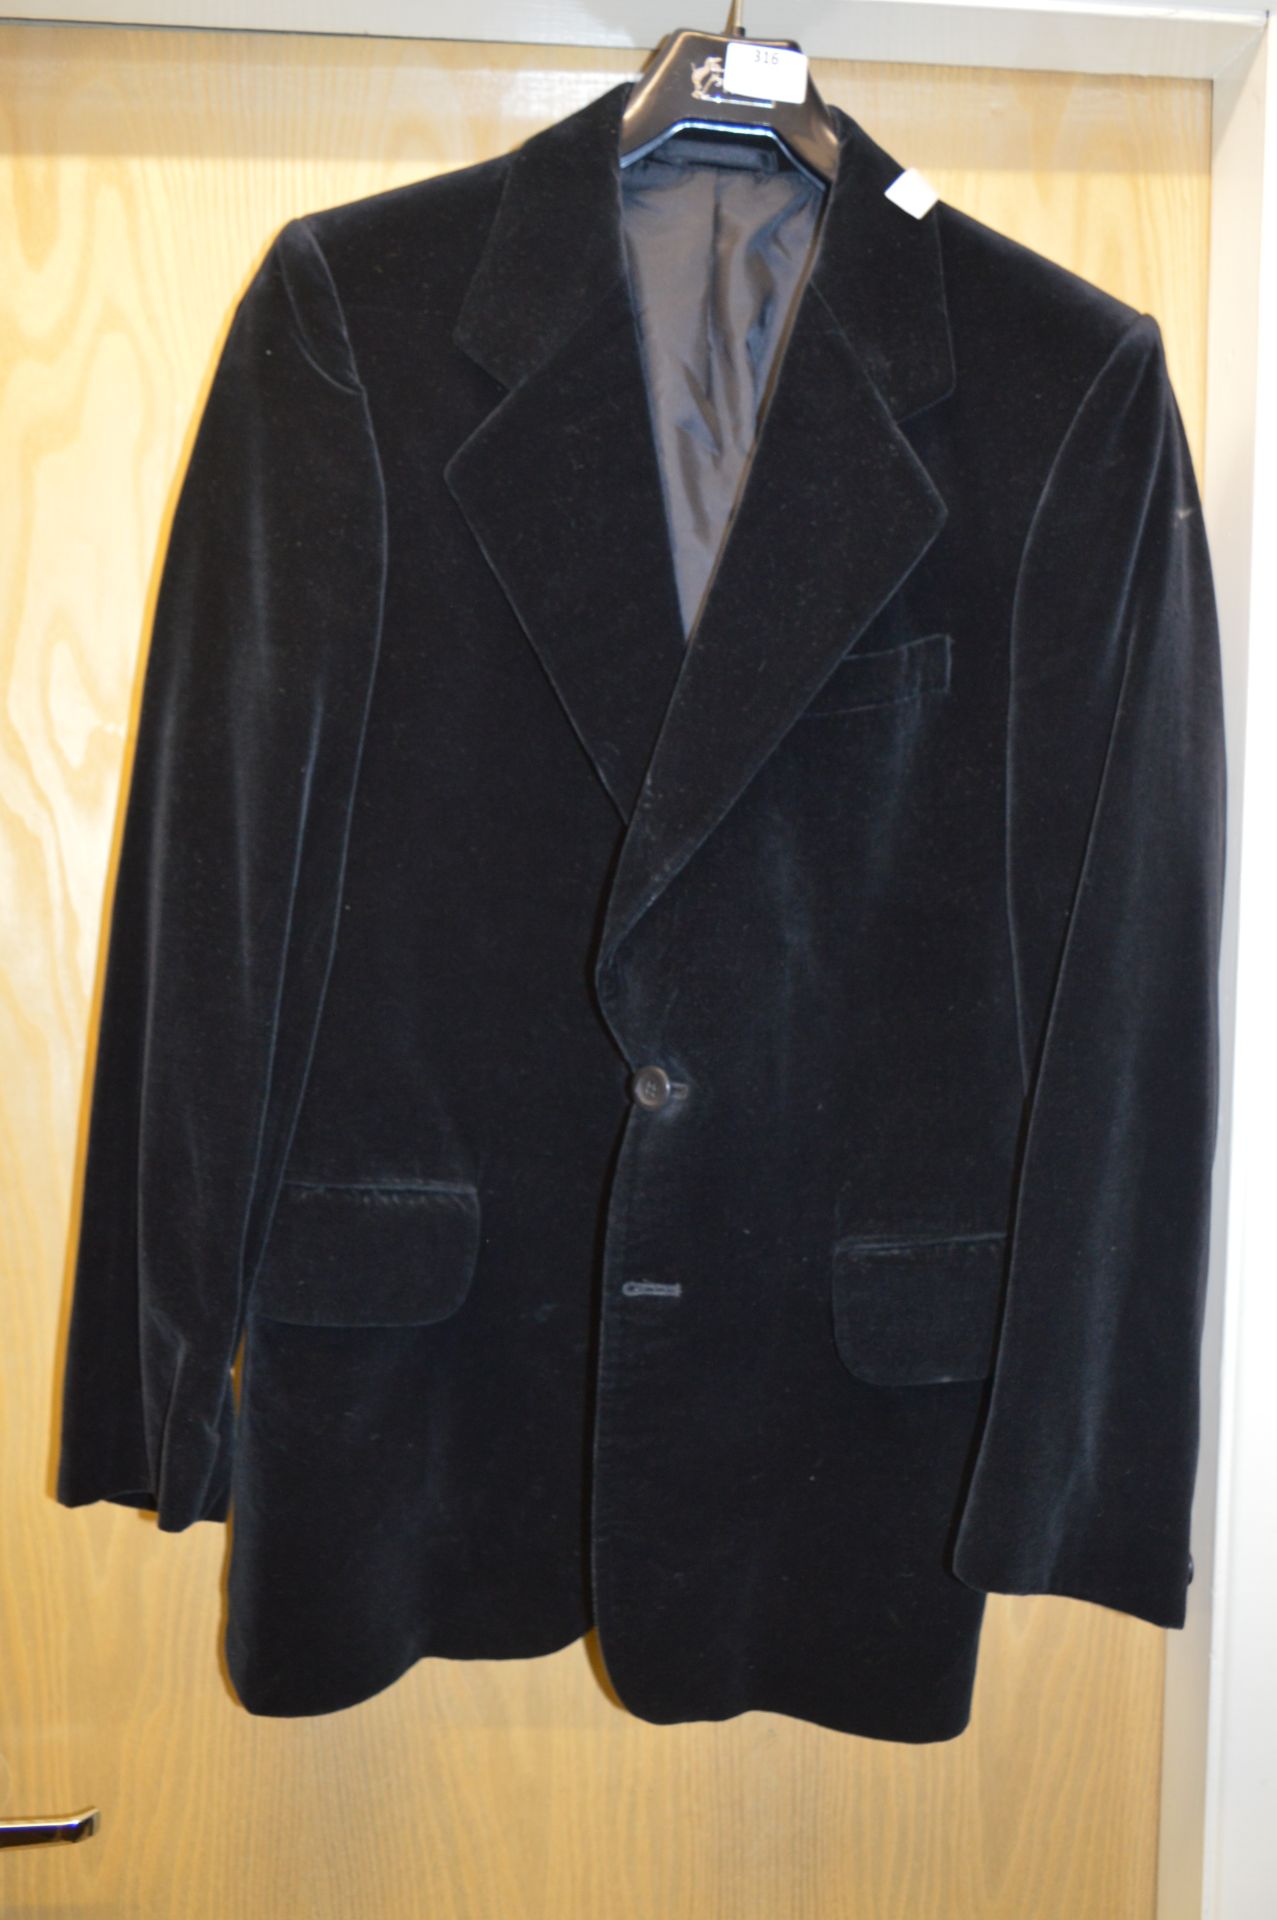 Vintage Clothing - Two Jackets and Three Waistcoat